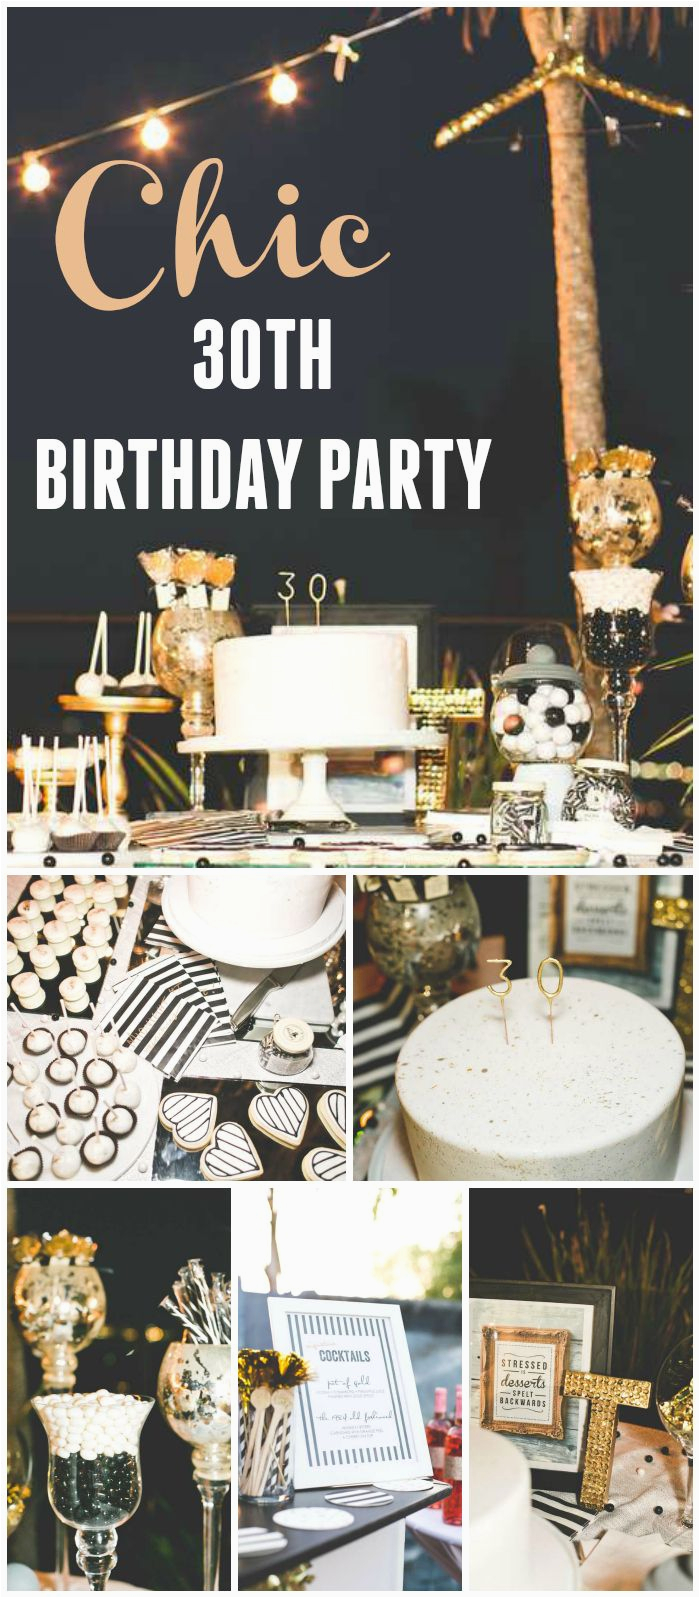 Decorations for 30th Birthday Party Ideas Best 25 30th Birthday themes Ideas On Pinterest 21st